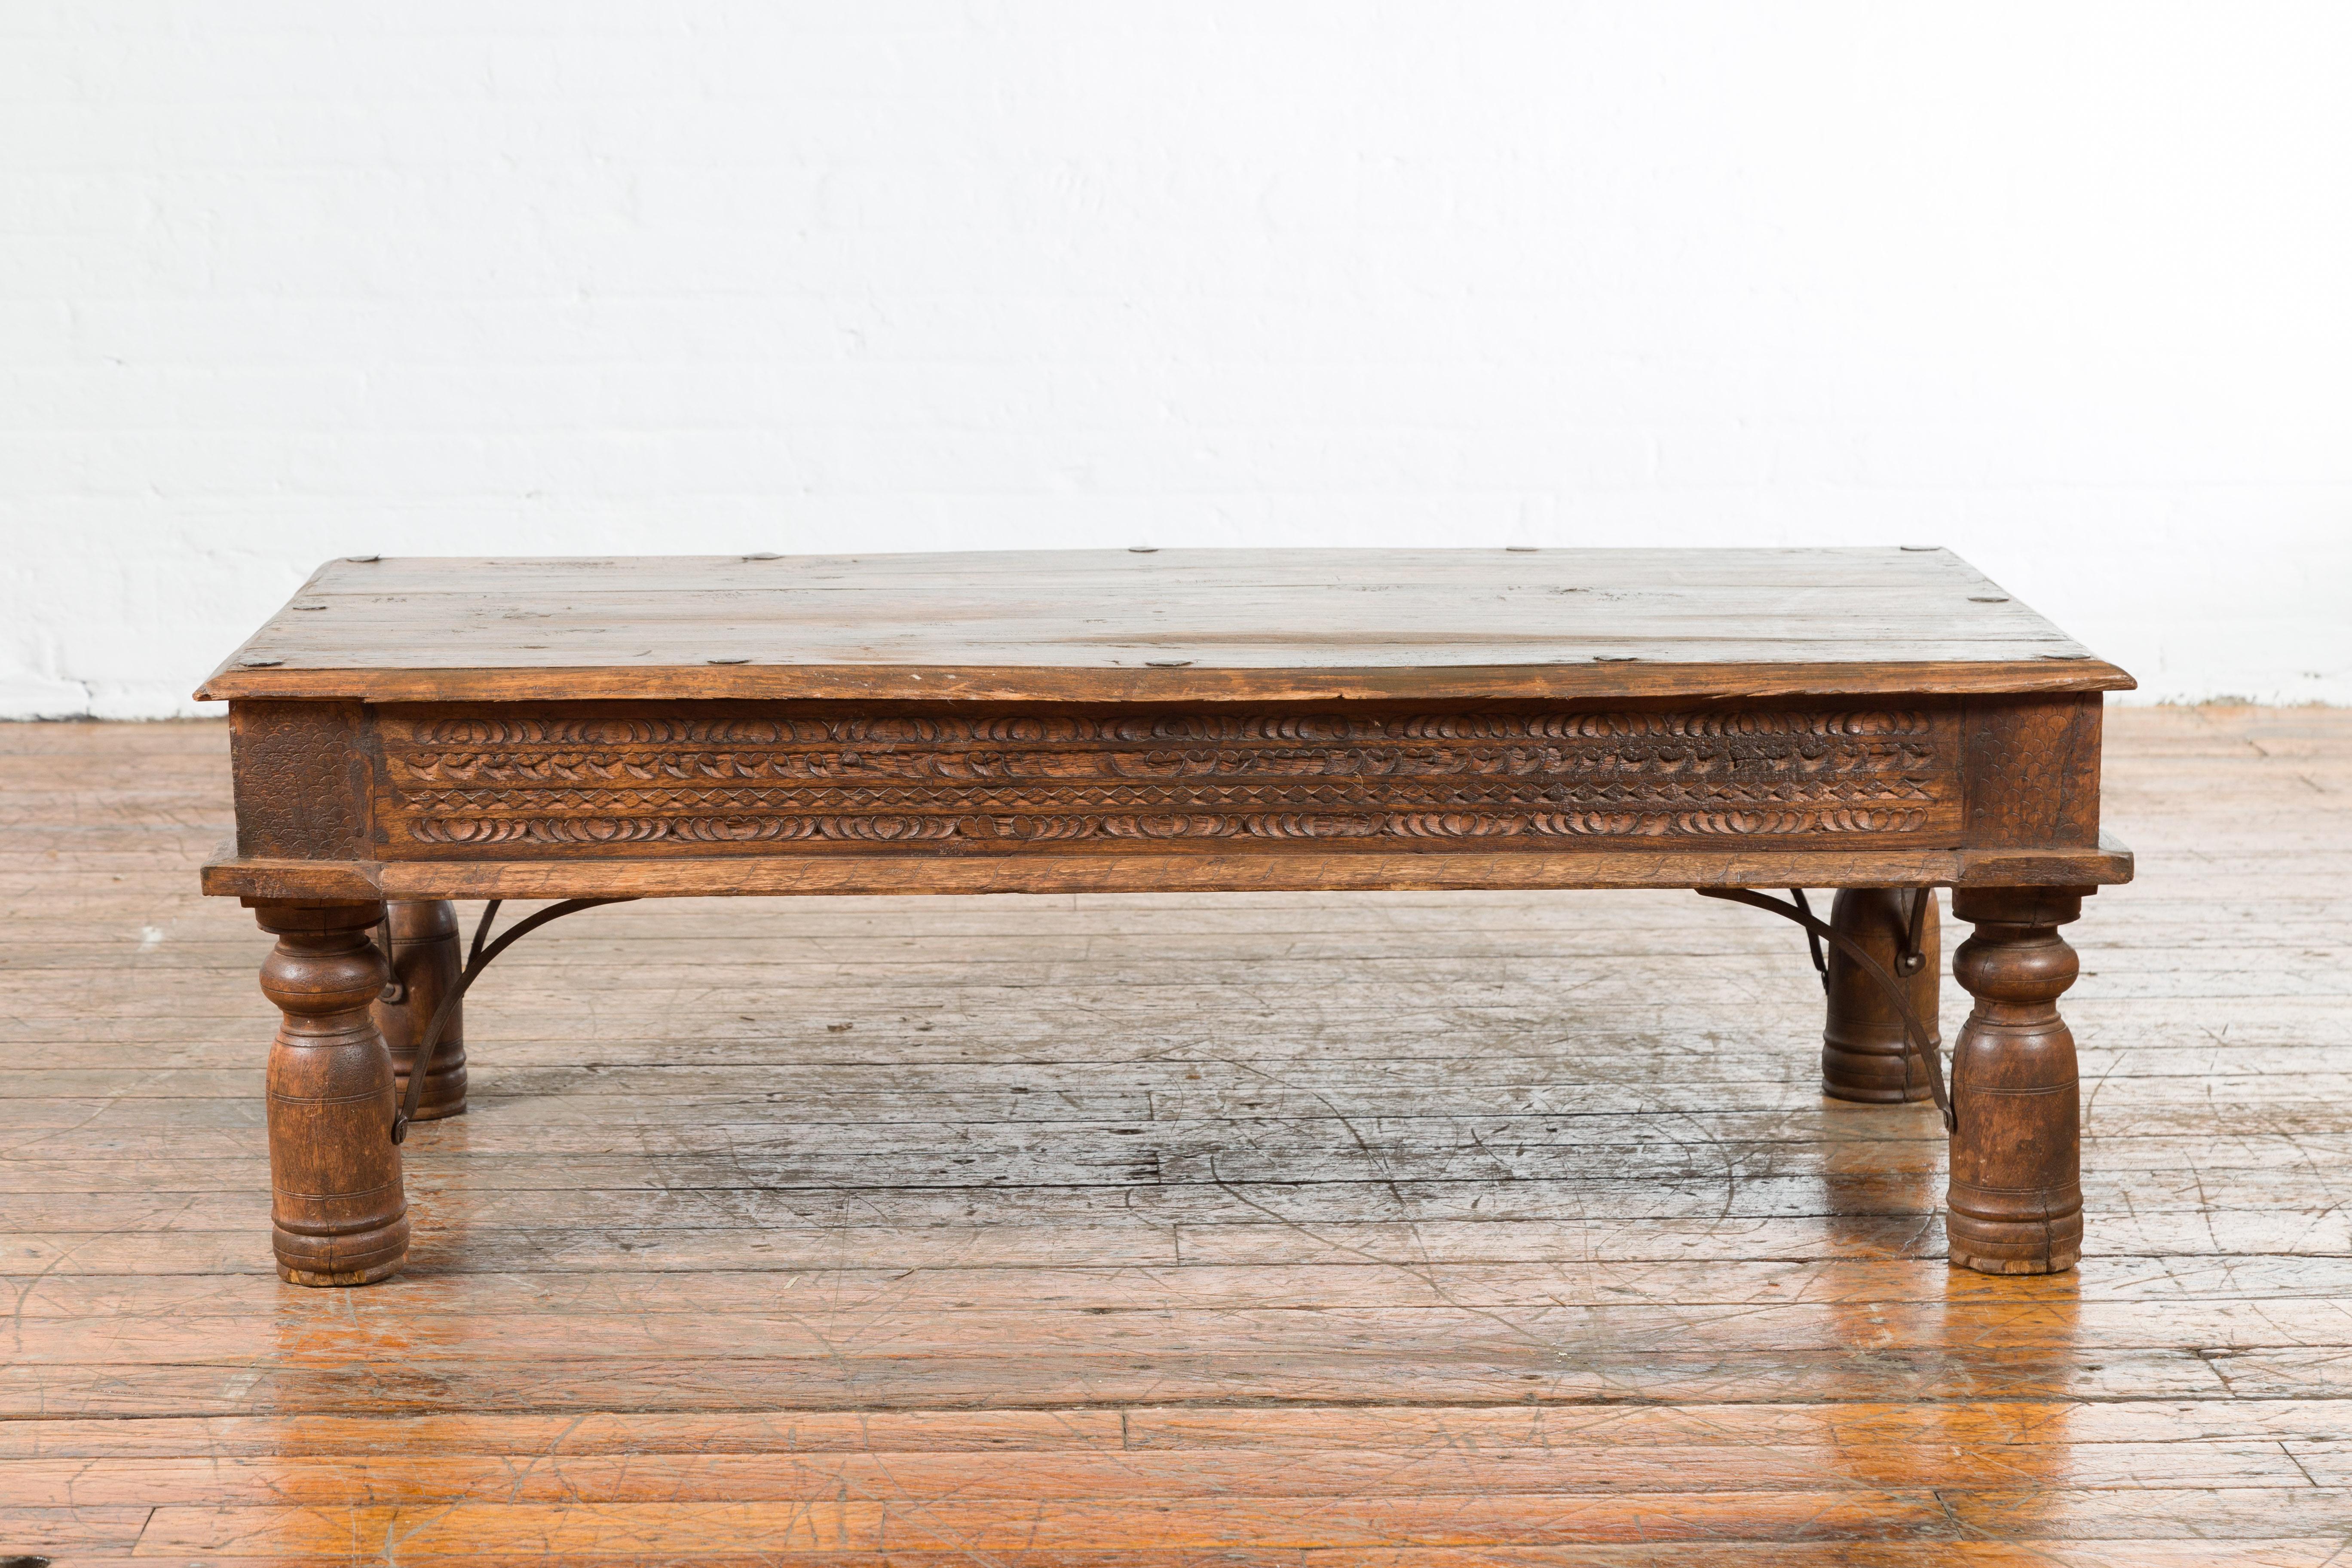 19th Century Indian Rustic Coffee Table with Carved Apron and Iron Accents 7